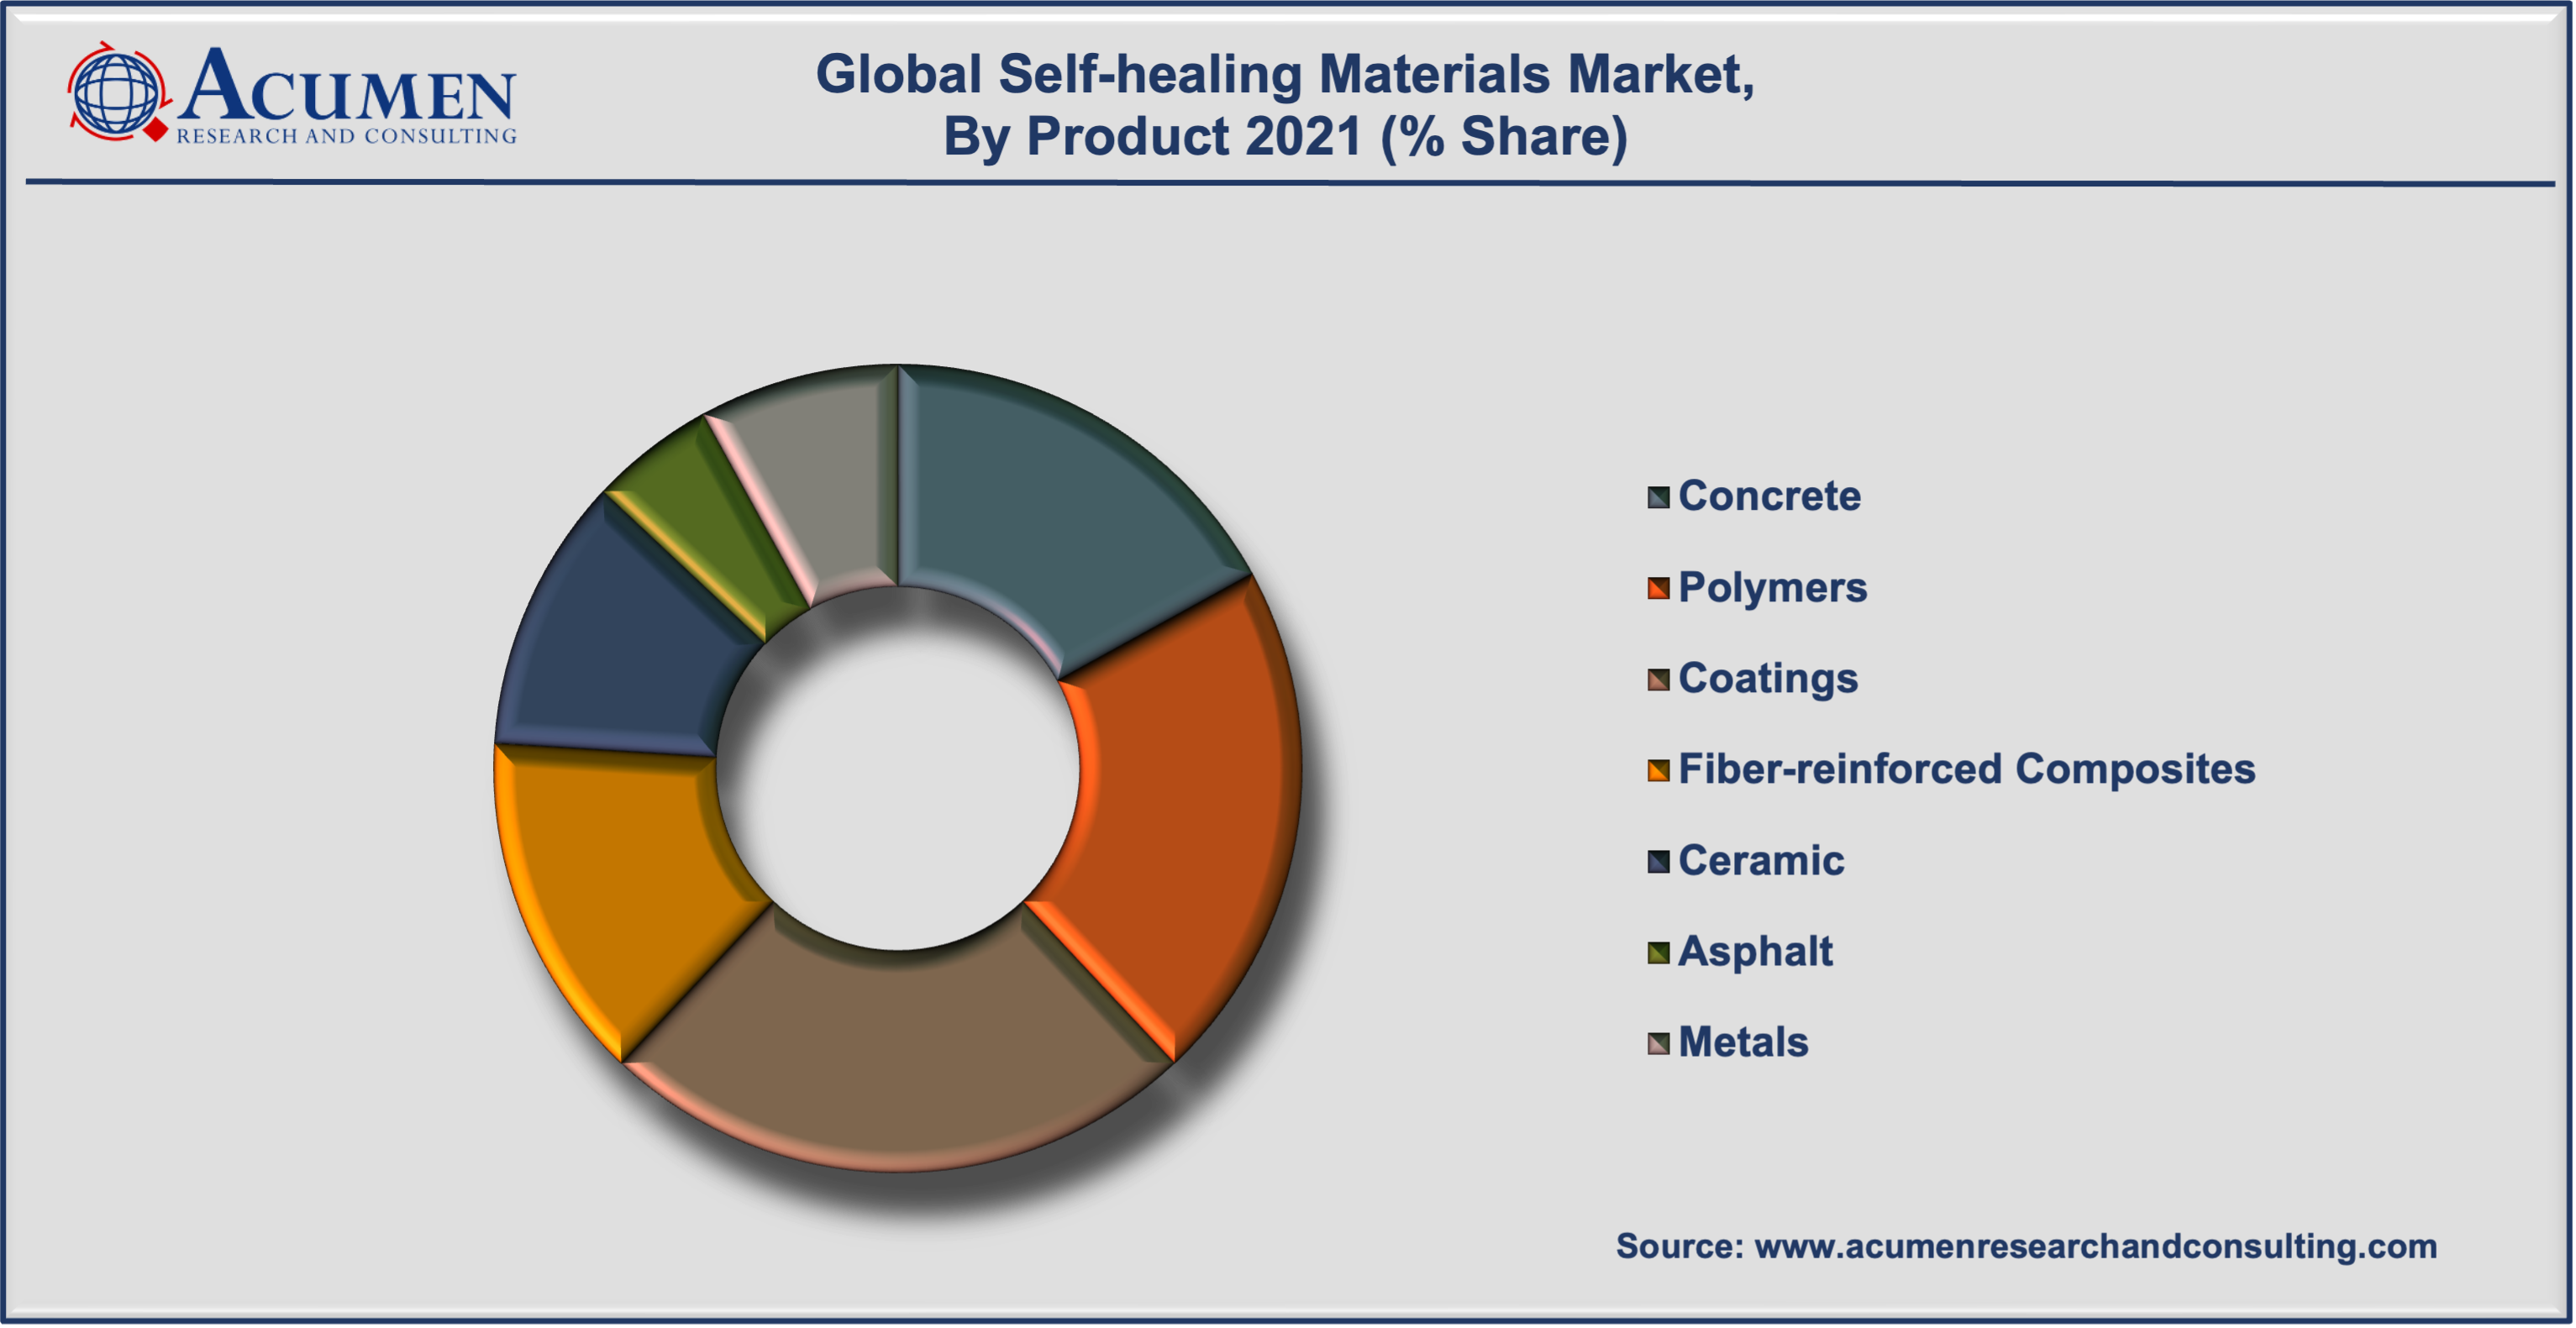 Self-healing Materials Market Share accounted for USD 1,054 Million in 2021 and is expected to reach USD 9,304 Million by 2030 with a considerable CAGR of 27.8% during the forecast period from 2022 to 2030.